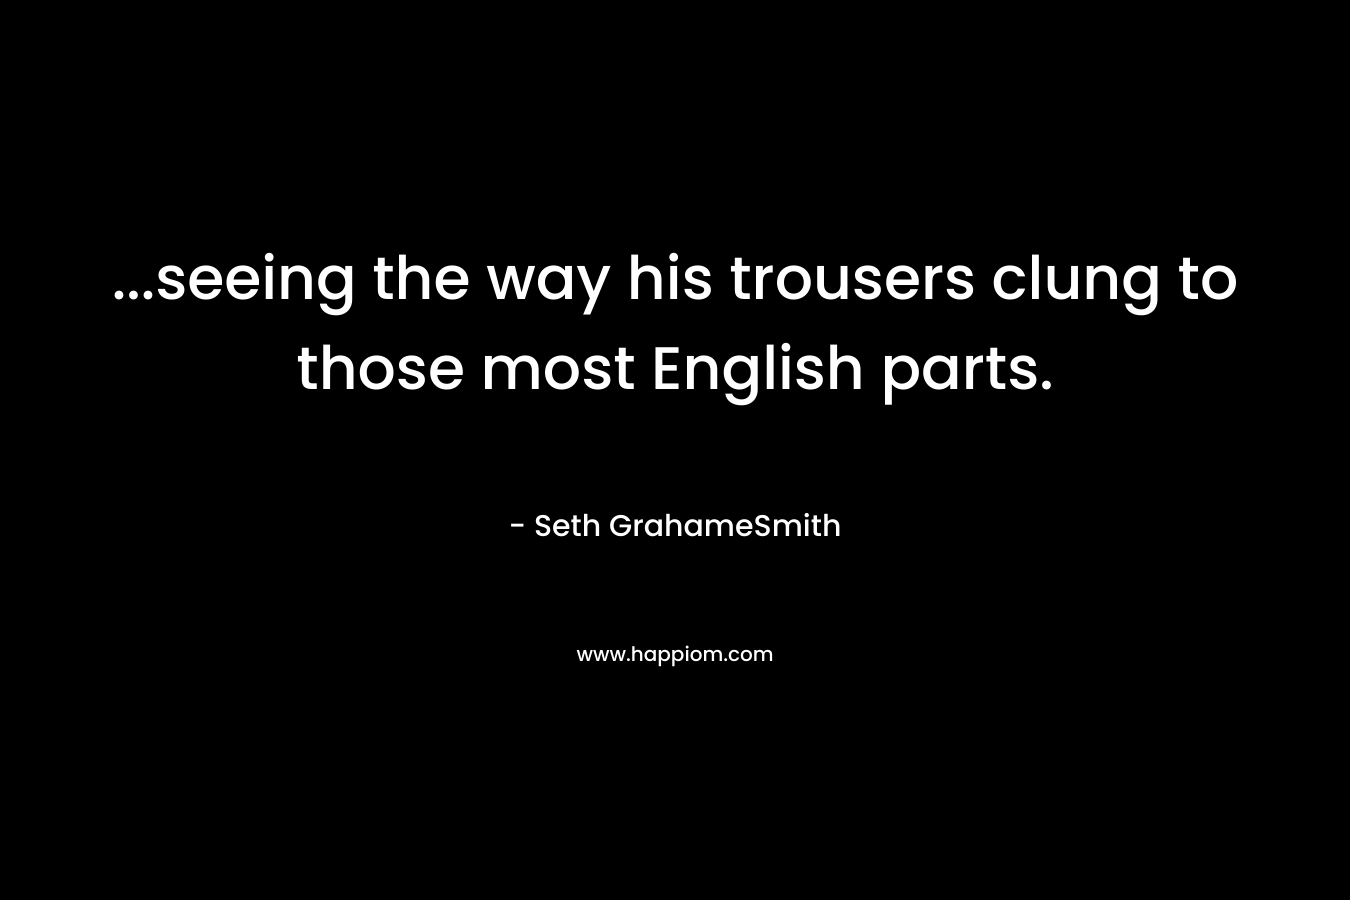 ...seeing the way his trousers clung to those most English parts.